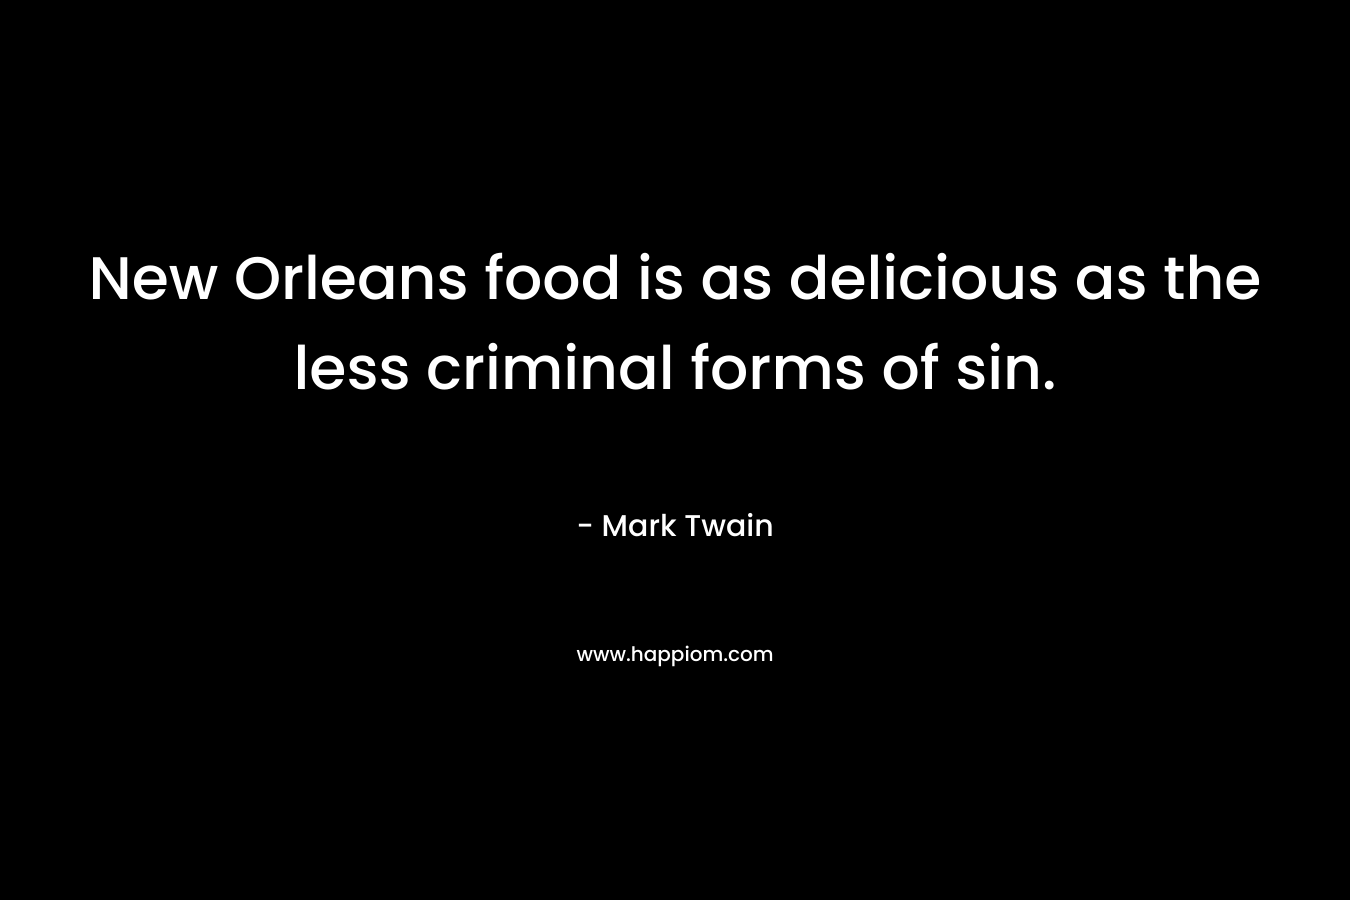 New Orleans food is as delicious as the less criminal forms of sin. – Mark Twain